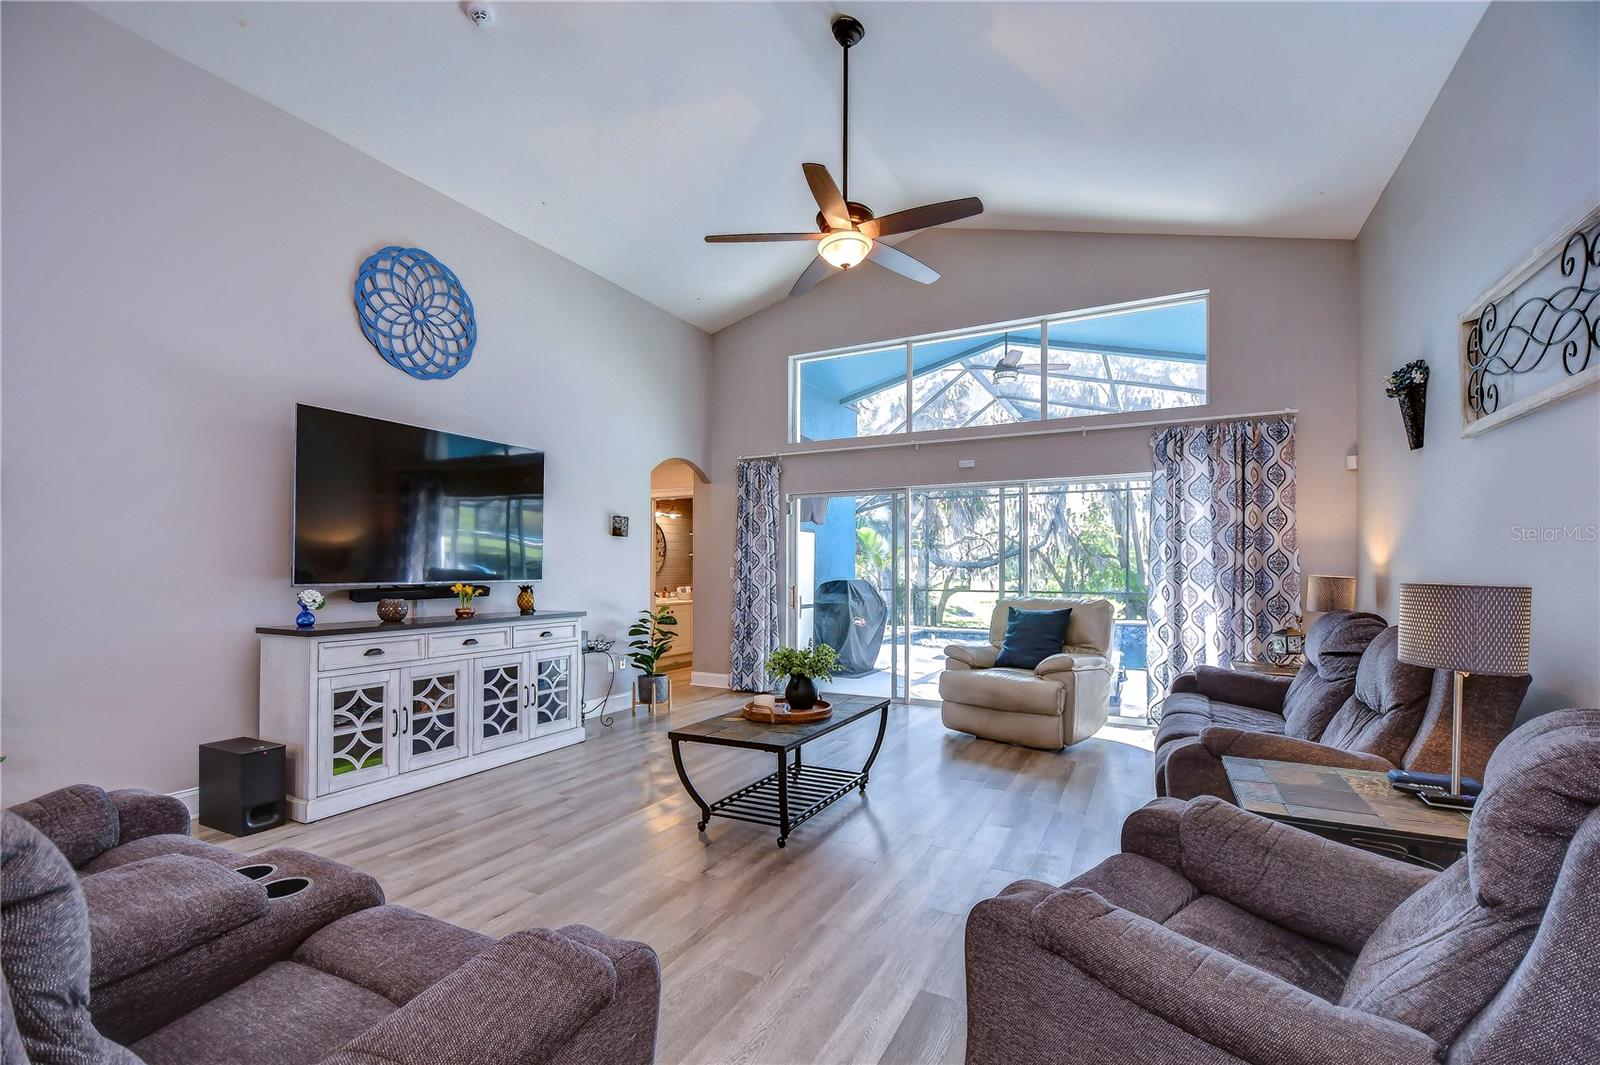 Vaulted ceilings and a wall of sliders with large transom windows above giving you unbelievable views!